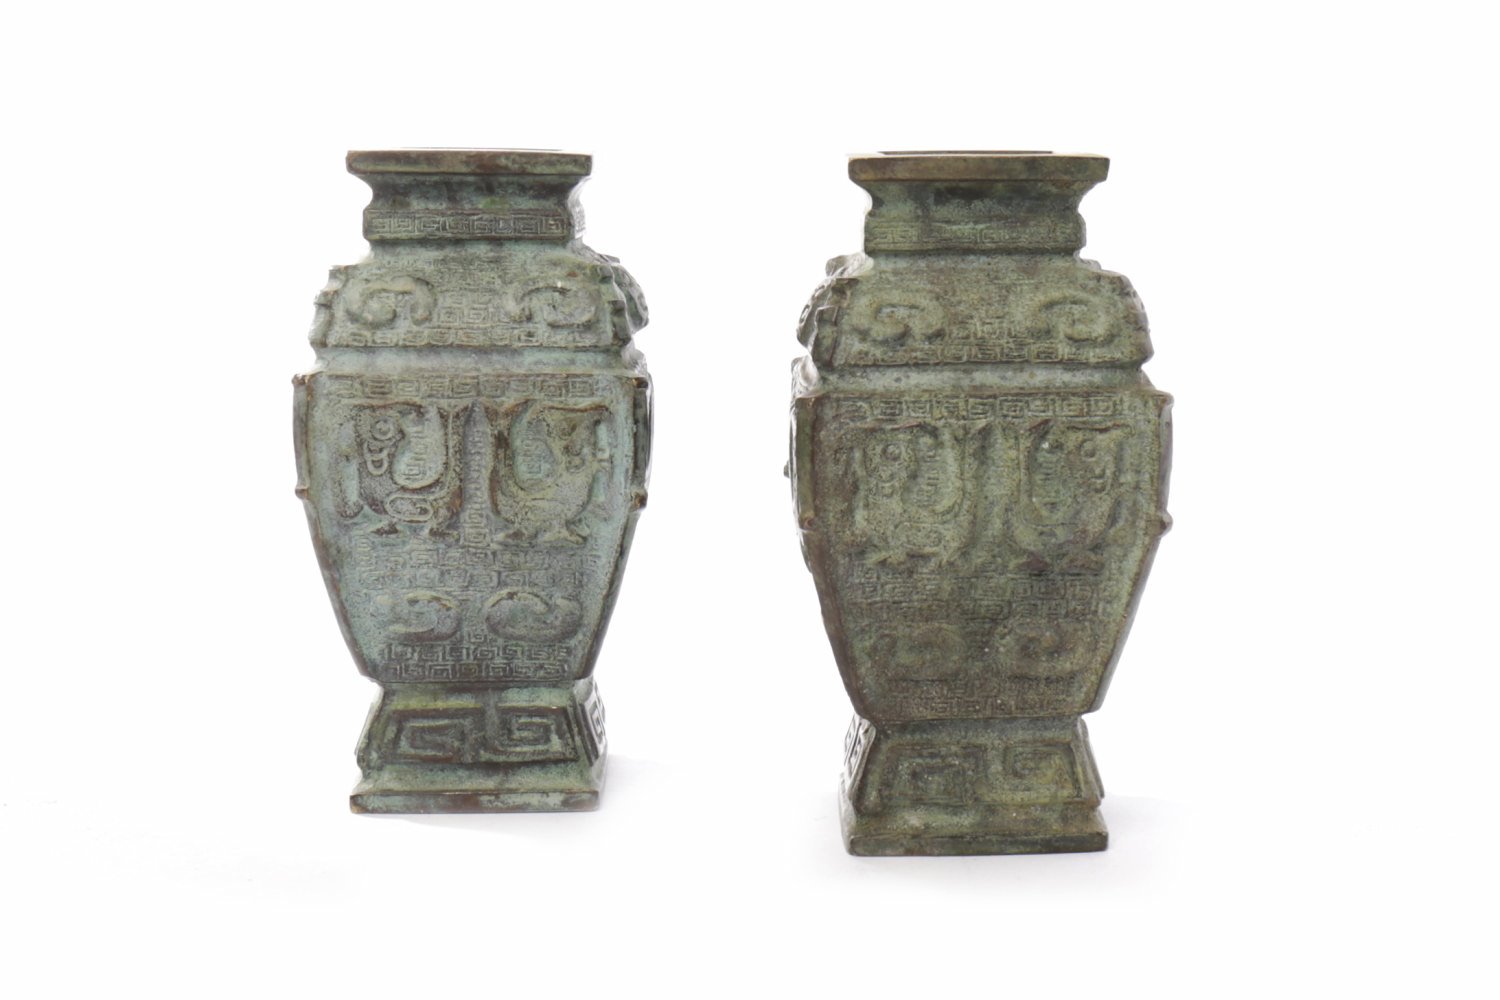 PAIR OF 20TH CENTURY CHINESE BRONZE VESSELS in an archaic style, with tao tie motifs in relief, - Image 2 of 2